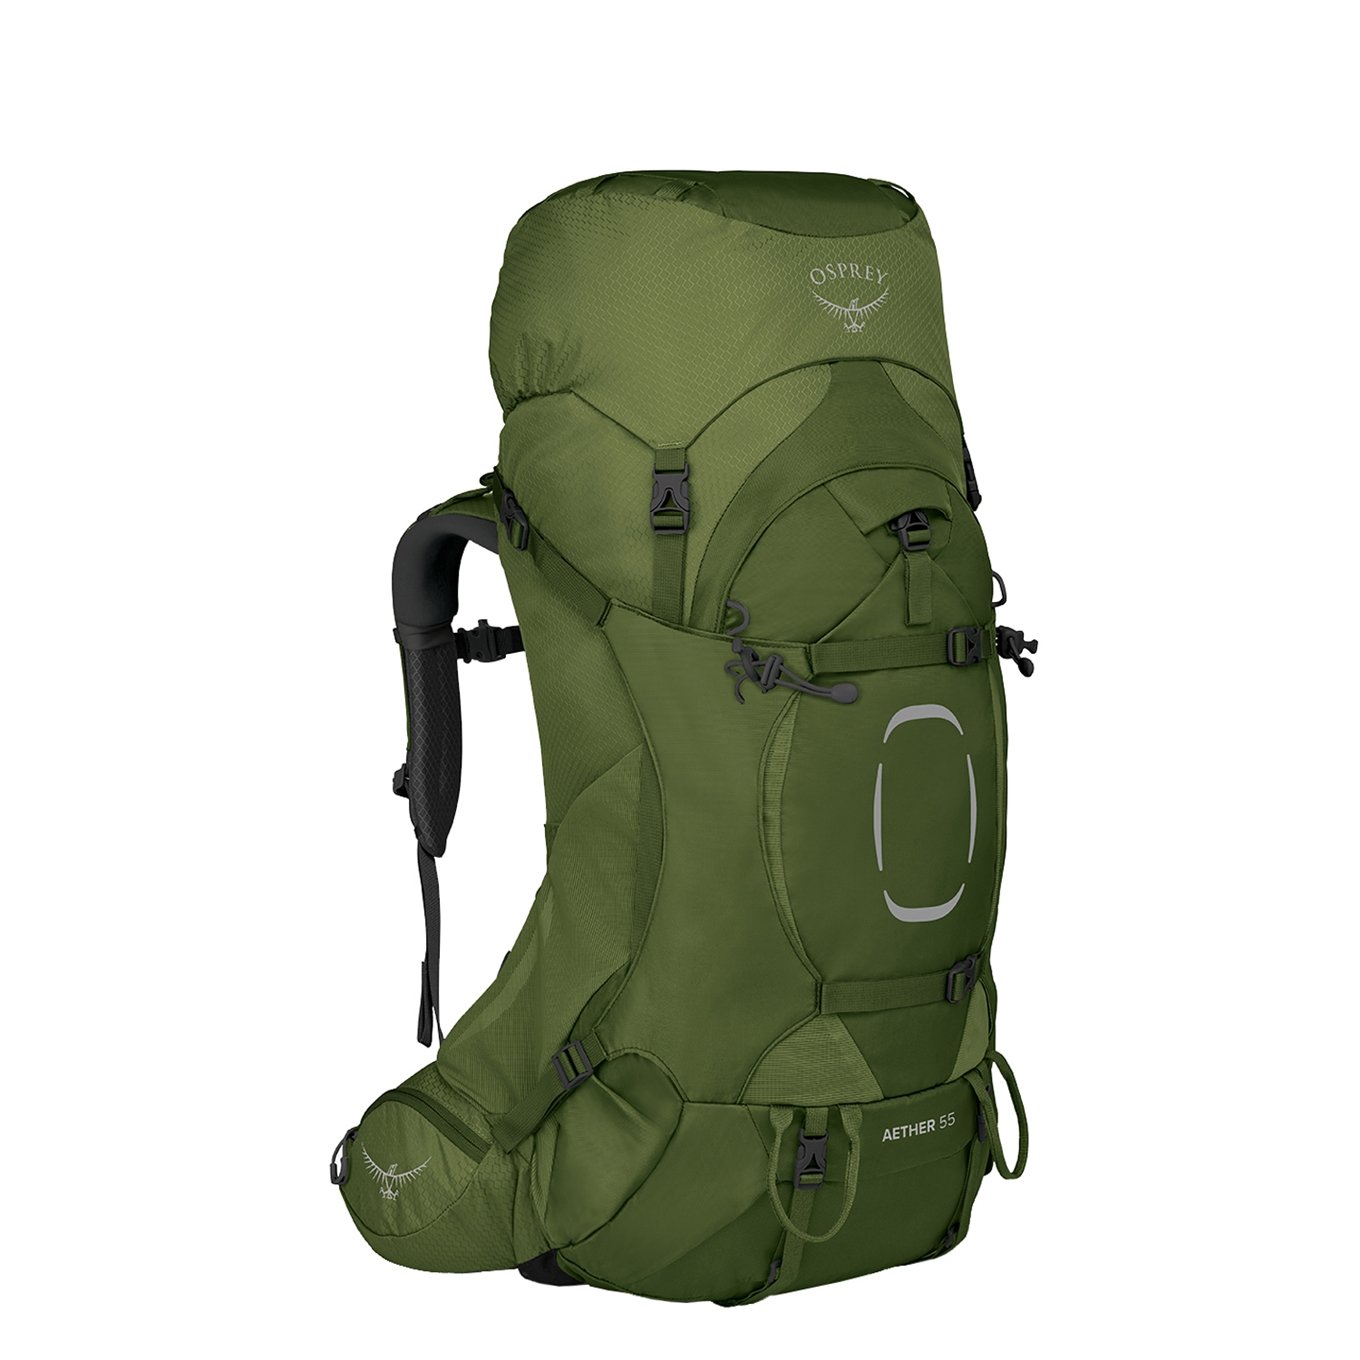 Osprey Aether 55 Backpack L/XL mustard green backpack